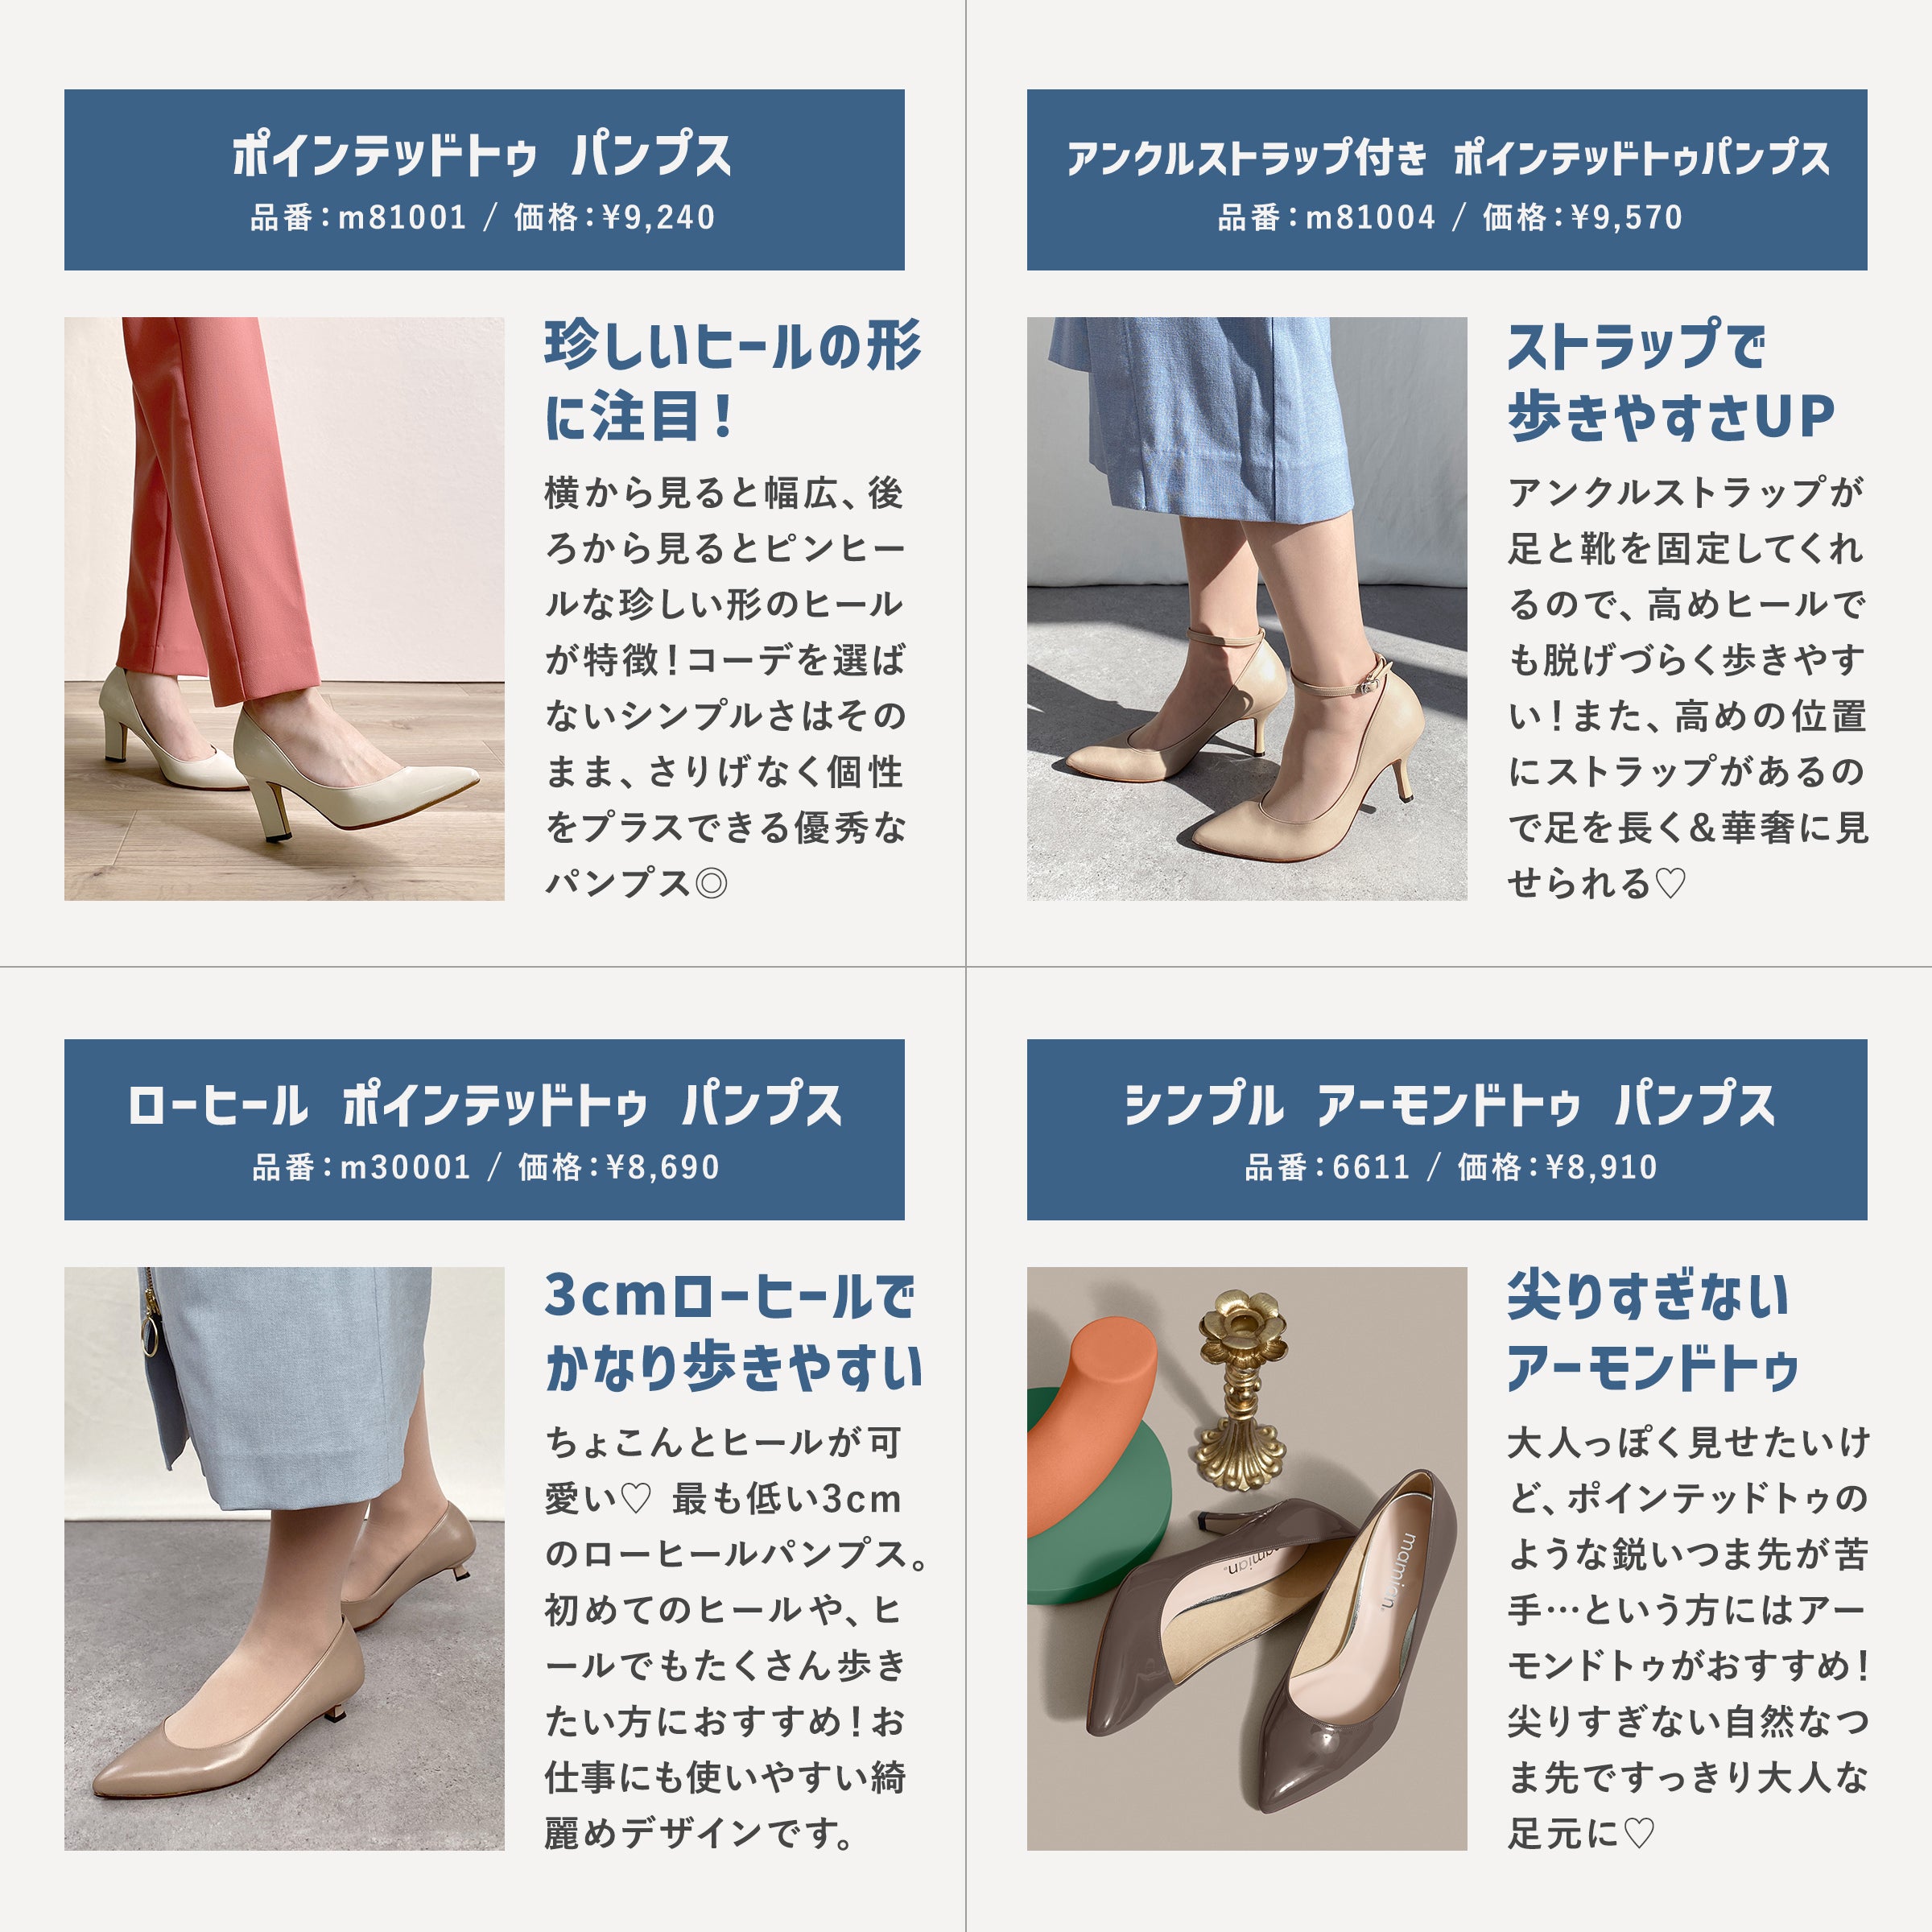 Special feature on basic design pumps and flat shoes